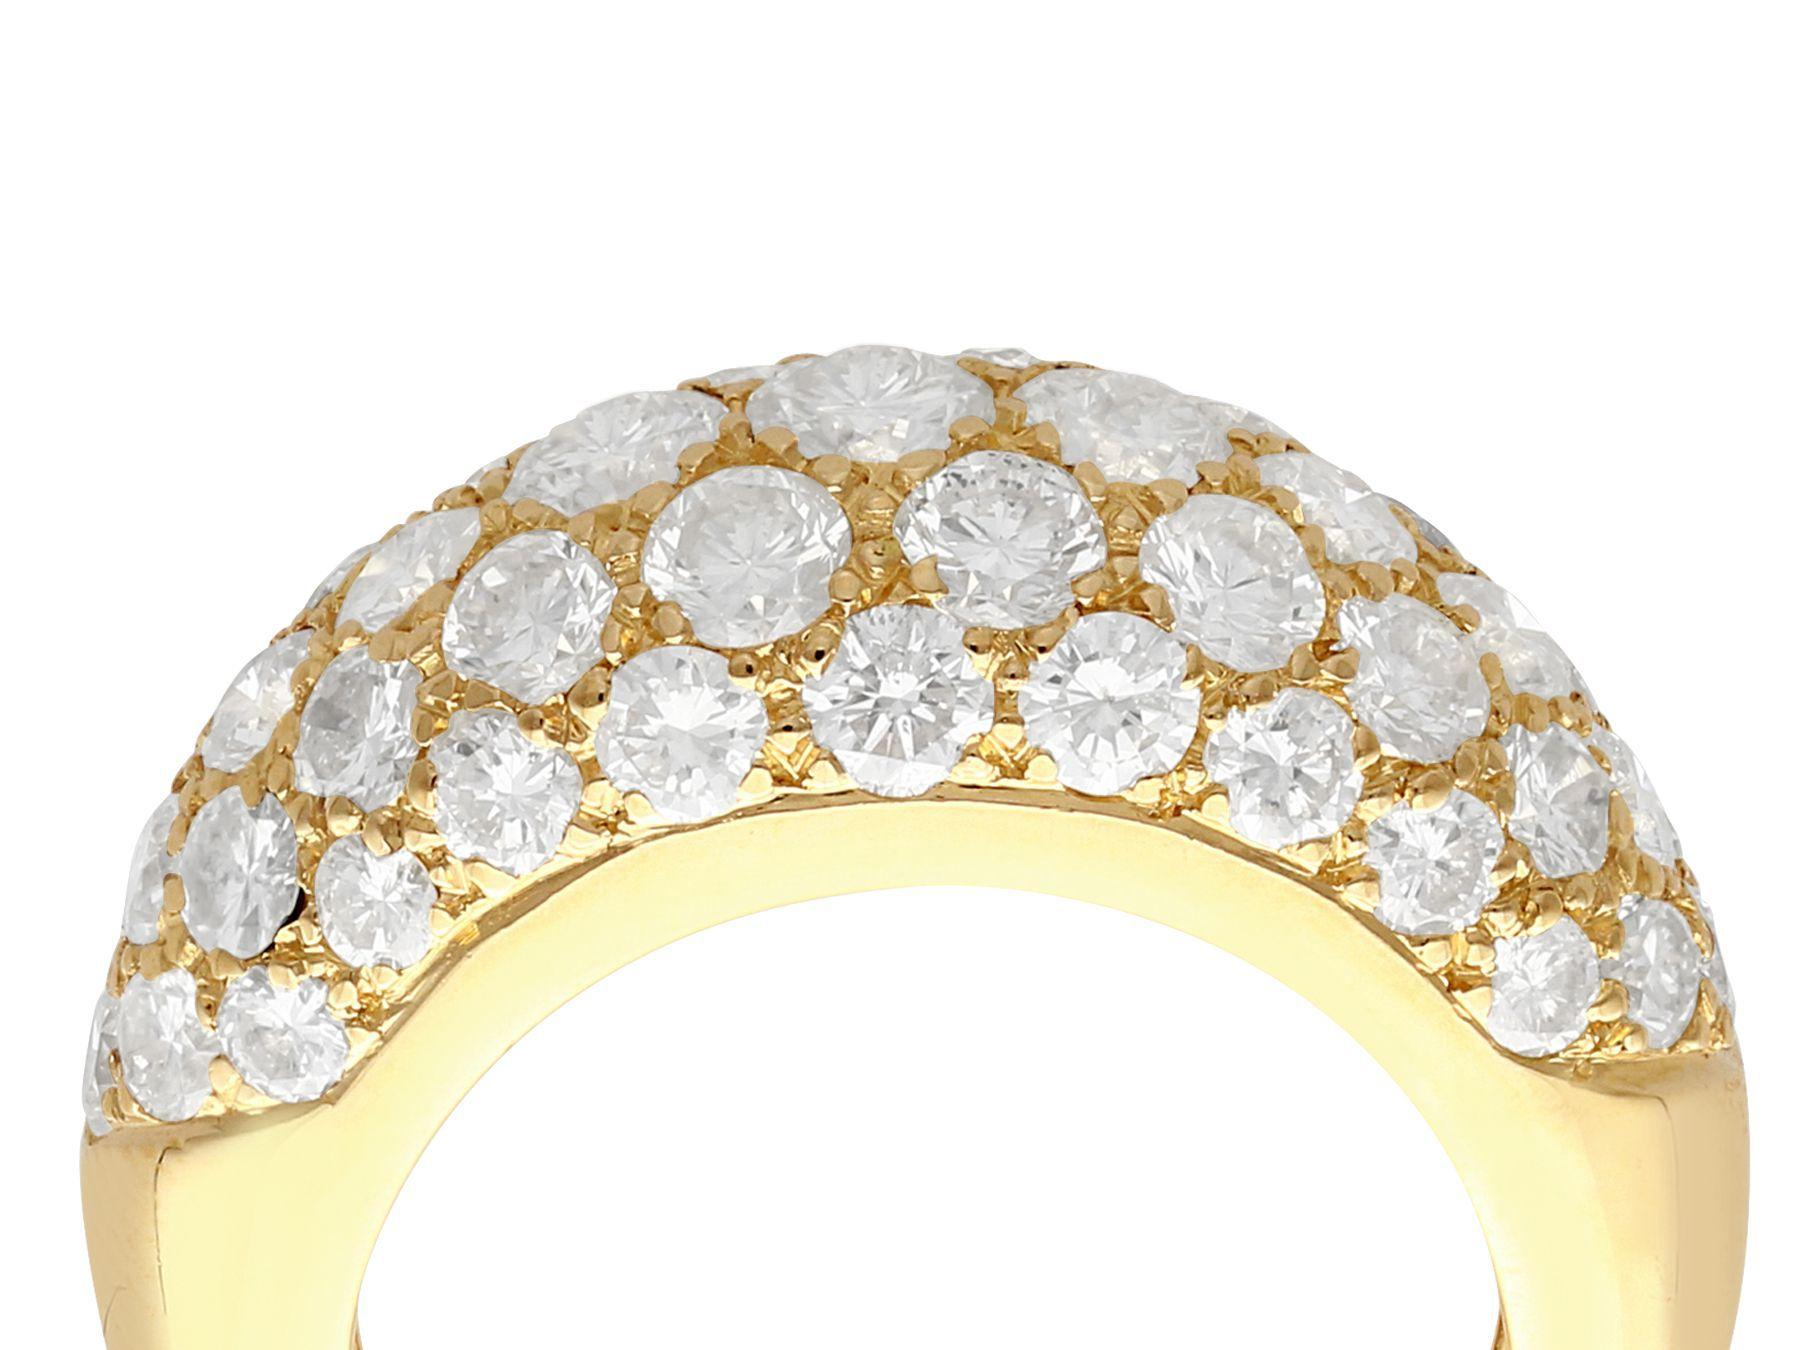 A stunning, fine and impressive vintage 2.15 carat diamond and 18 karat yellow gold cocktail ring; part of our diverse diamond jewelry and estate jewelry collections.

This stunning, fine and impressive vintage ring has been crafted in 18k yellow